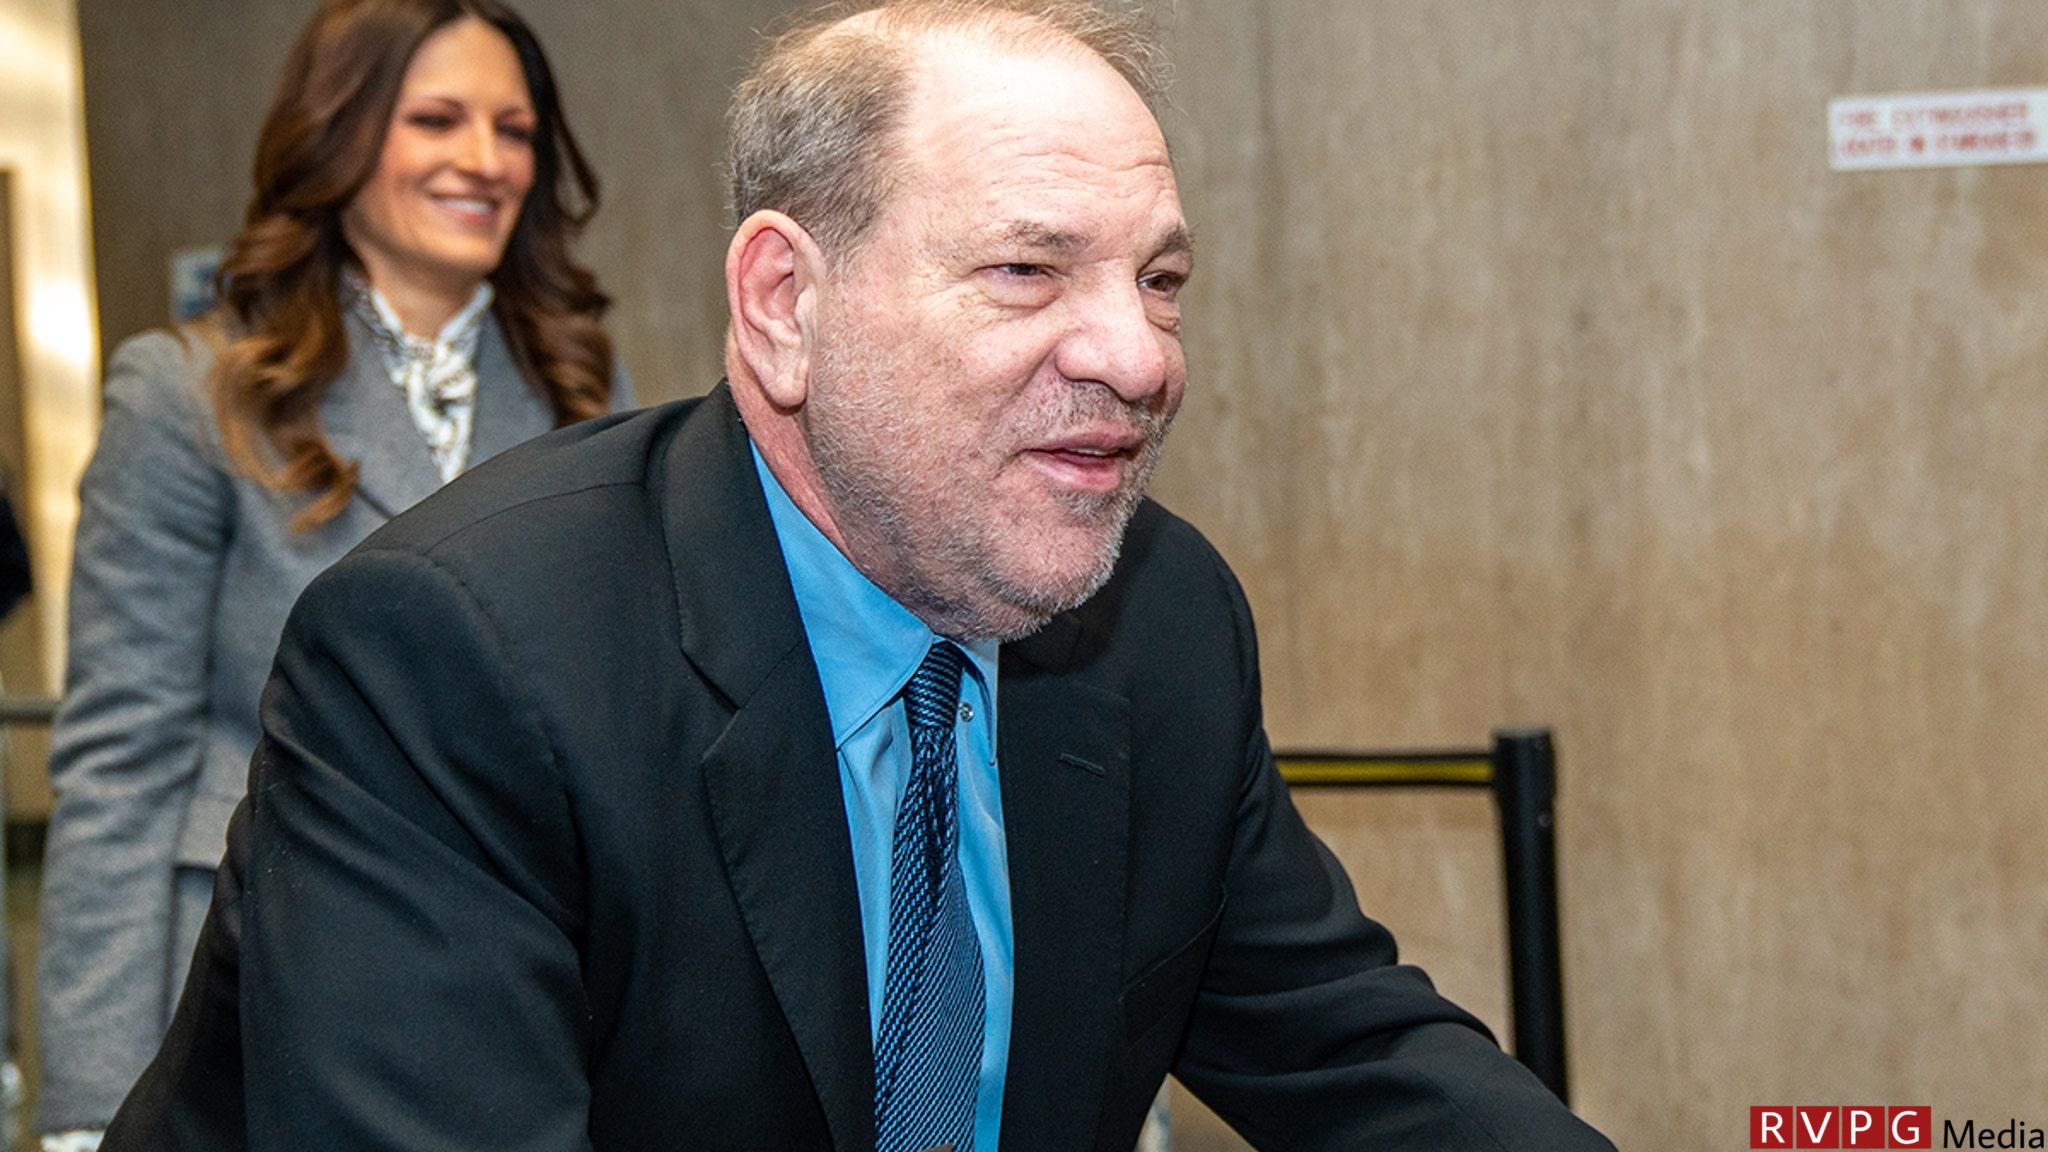 Harvey Weinstein is happy and tearful after his New York rape conviction was overturned